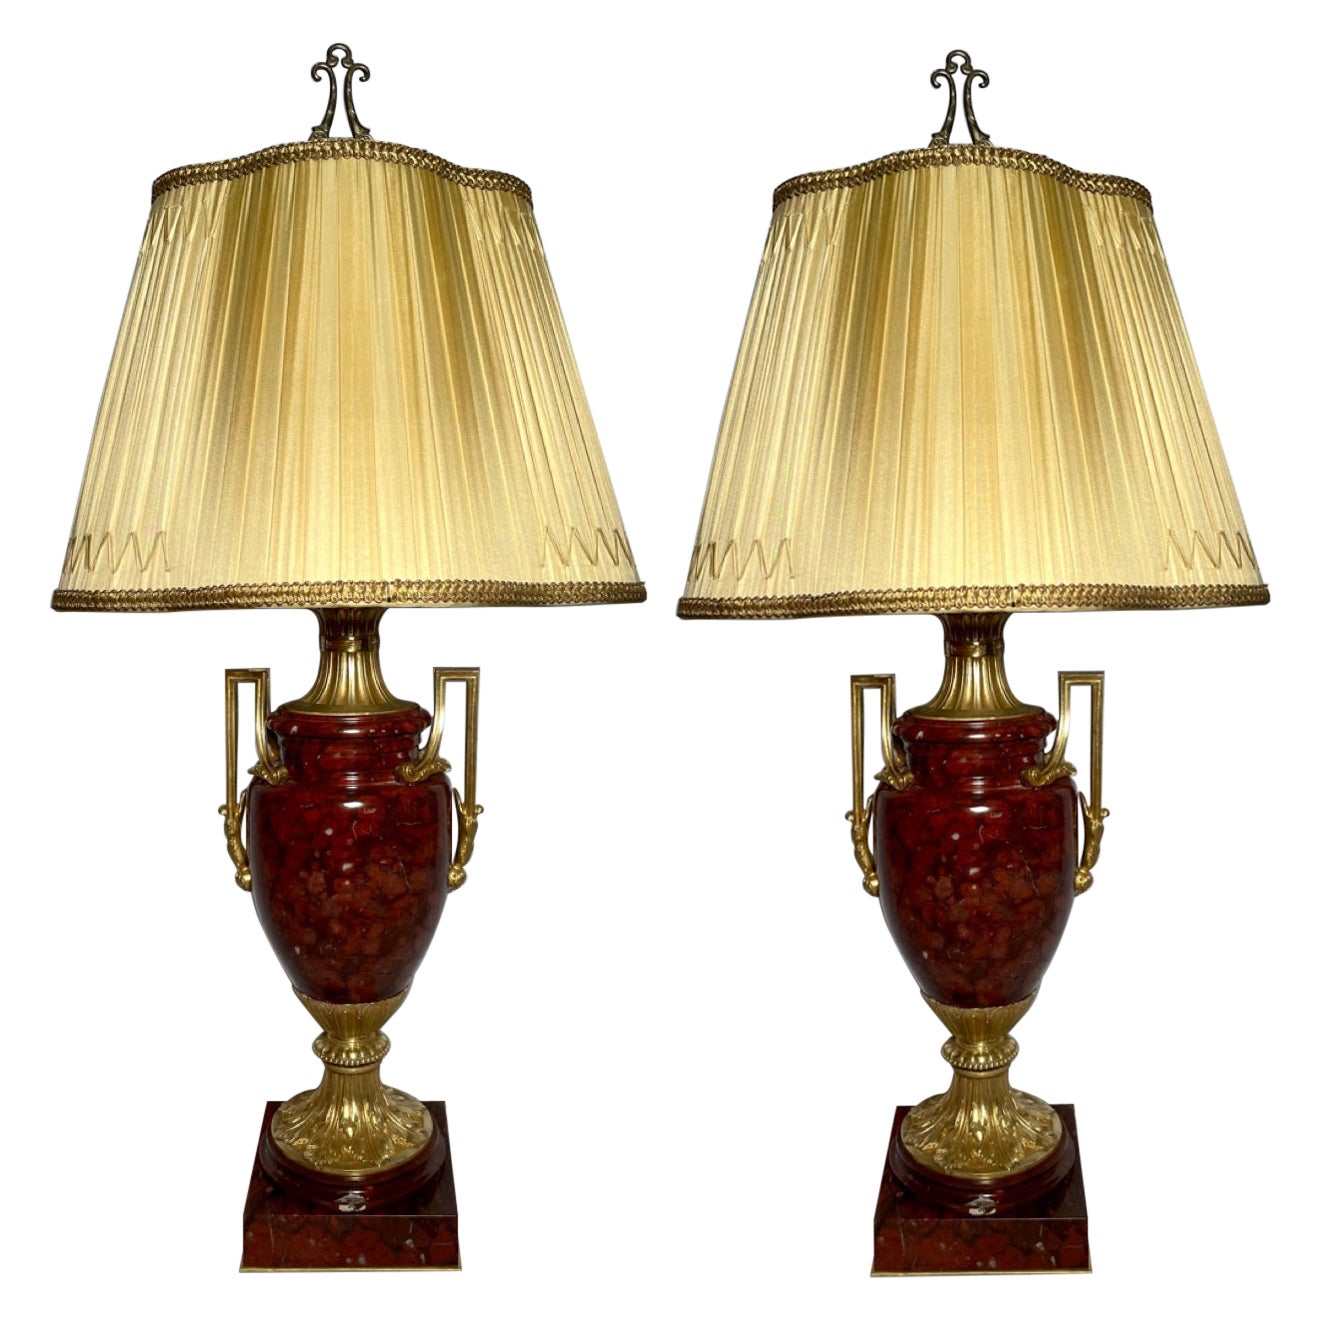 Pair Antique French Napoleon III Ormolu Mounted Red Marble Lamps w/ Silk Shades For Sale